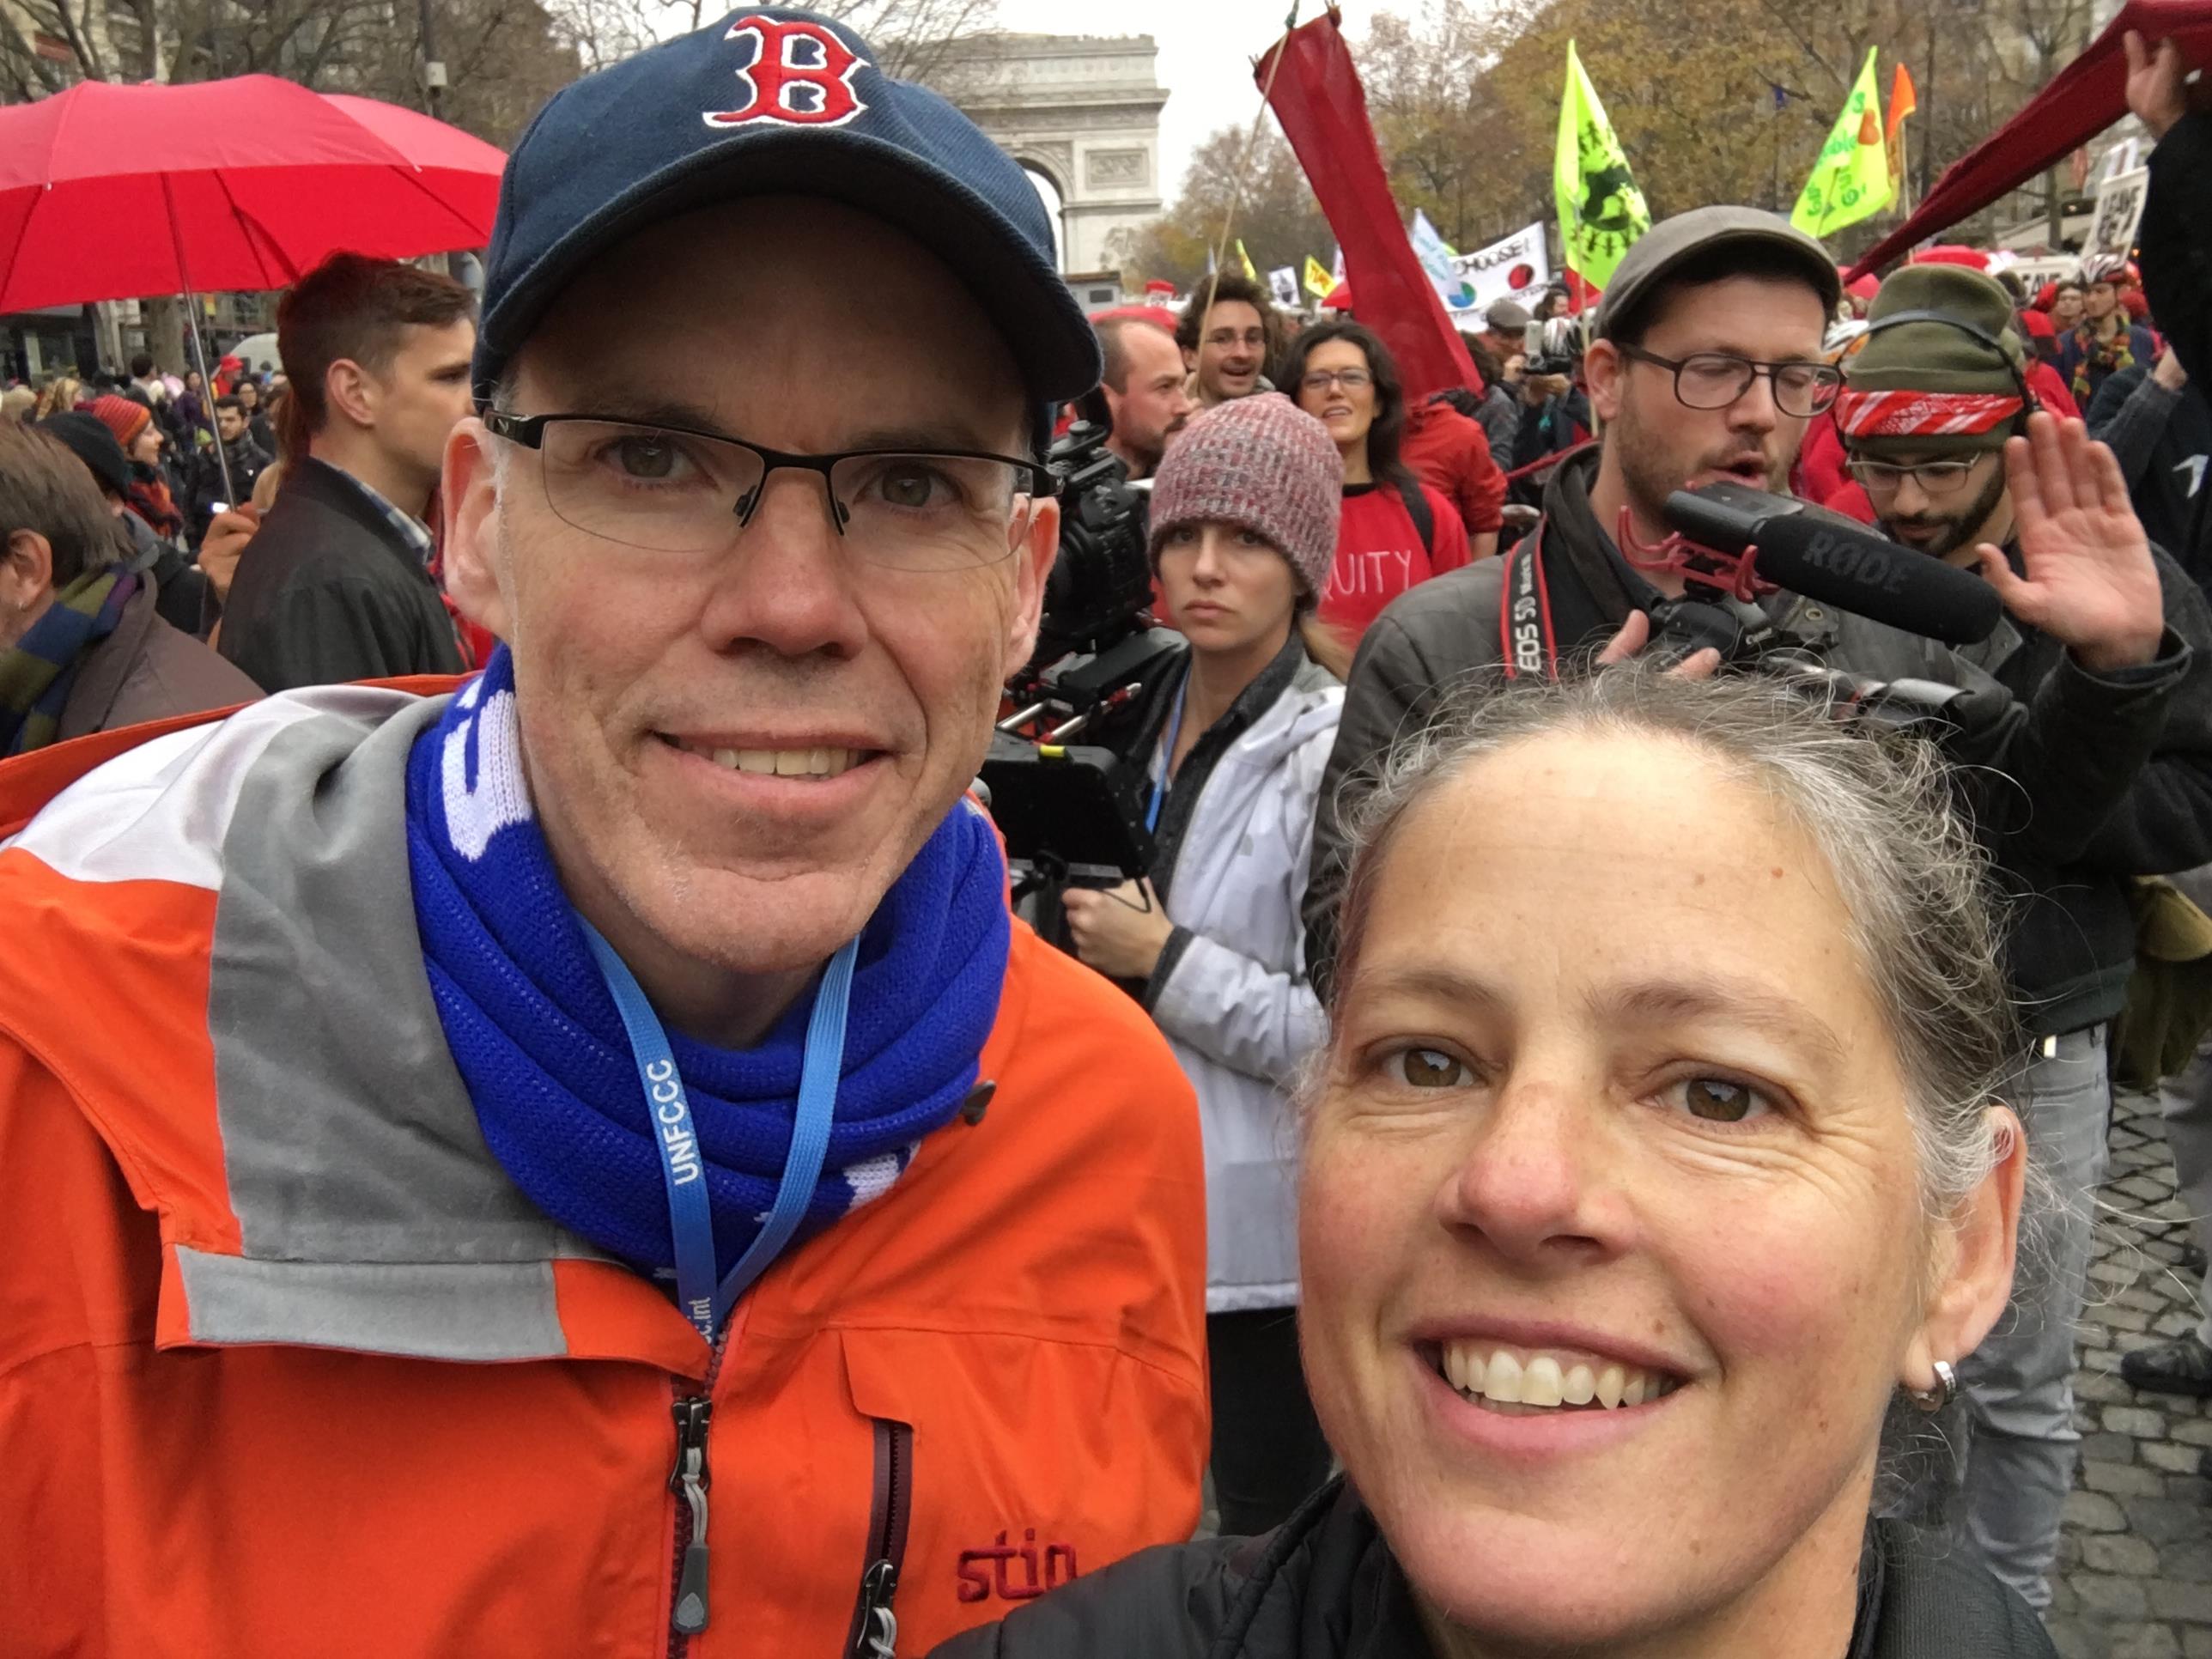 WWU master’s student Jill MacIntyre Witt is seen here with environmentalist and 350.org co-founder Bill McKibben. Nicole Brown, also of Bellingham, was among the 15,000 demonstrators in Paris at the COP21 Summit. 